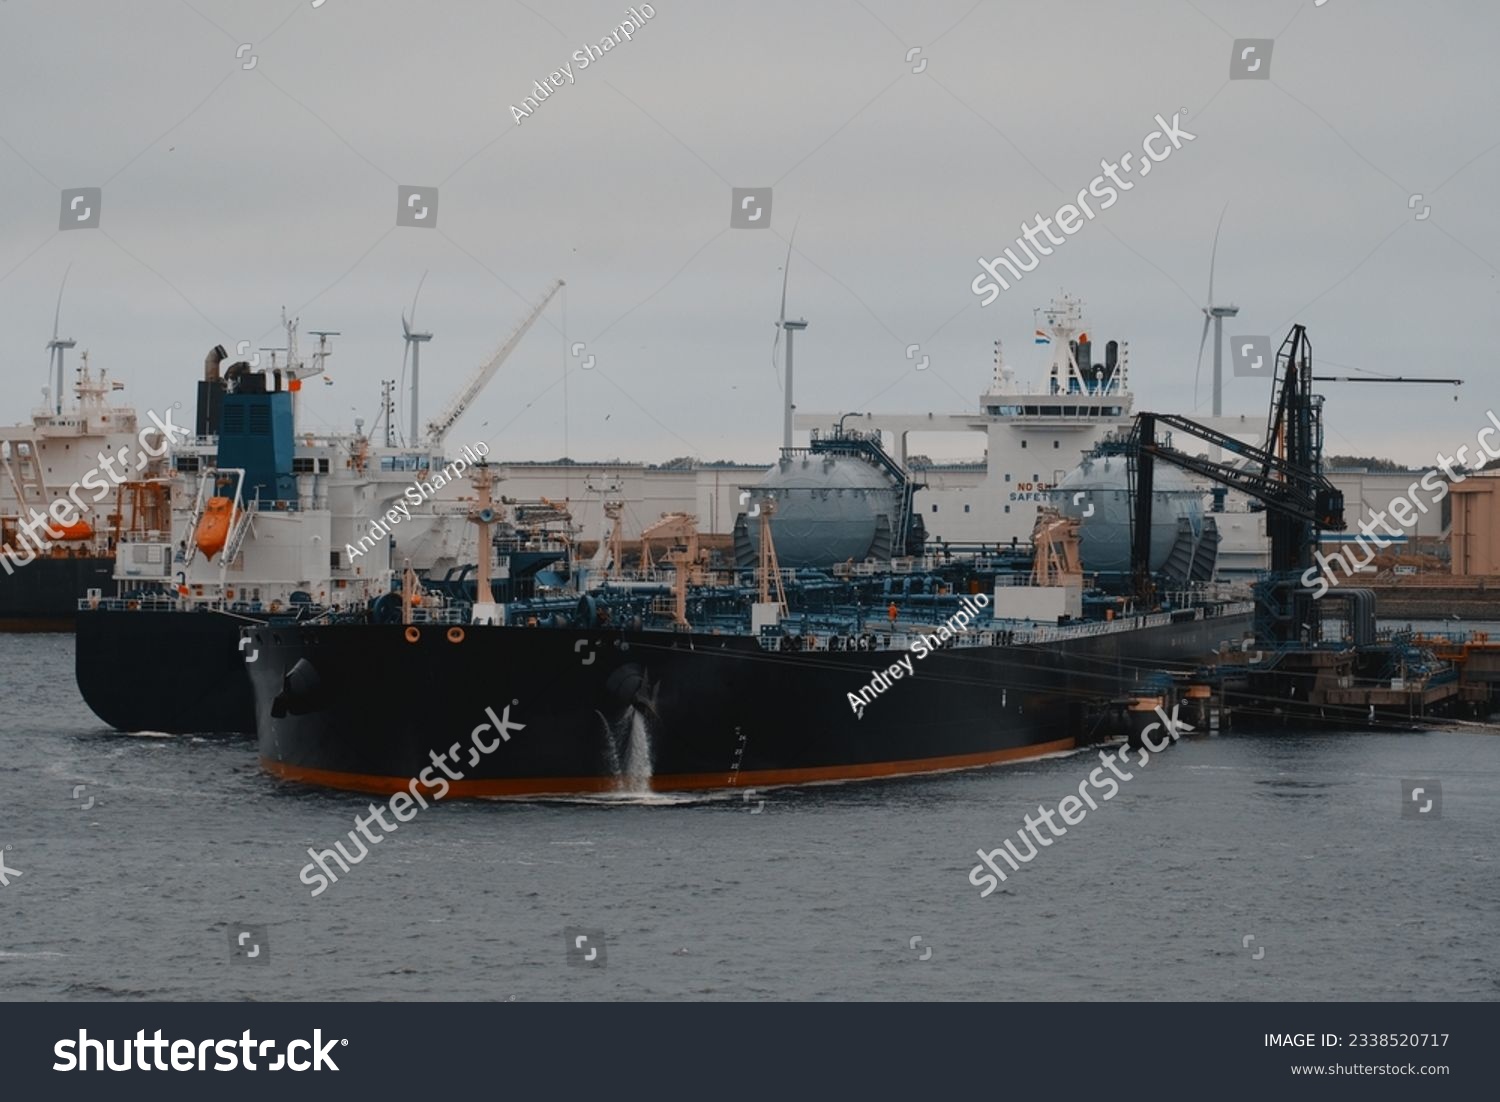 Floating storage and regasification unit. Liquified natural gas bunkering vessel and oil tanker powered by LNG in the port during the ship-to-ship operations. #2338520717